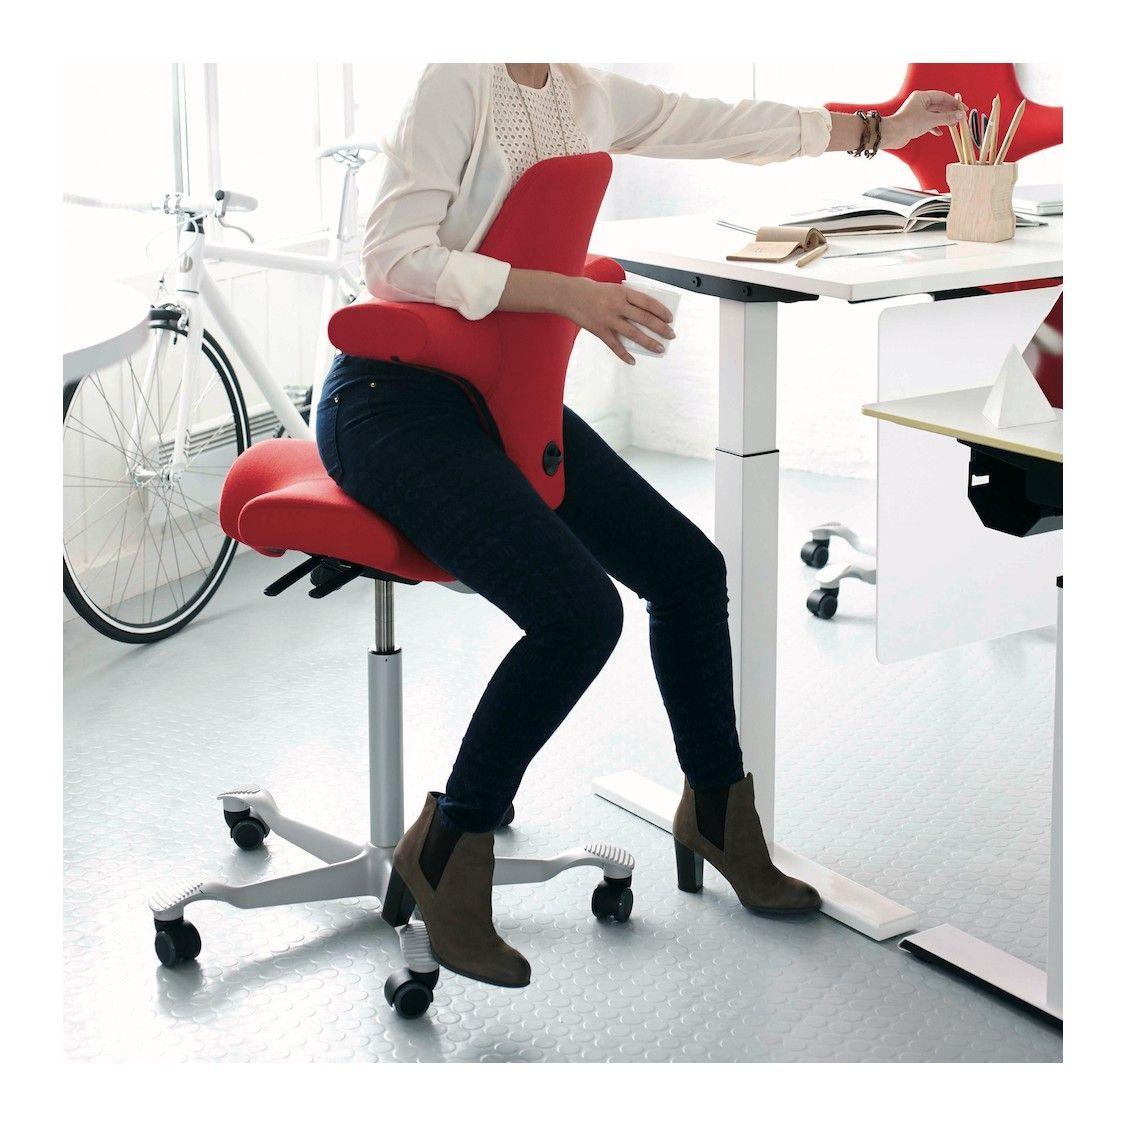 Red Backwards C Logo - Fully's Tic Toc And HAG Capisco Chairs Inspire Movement